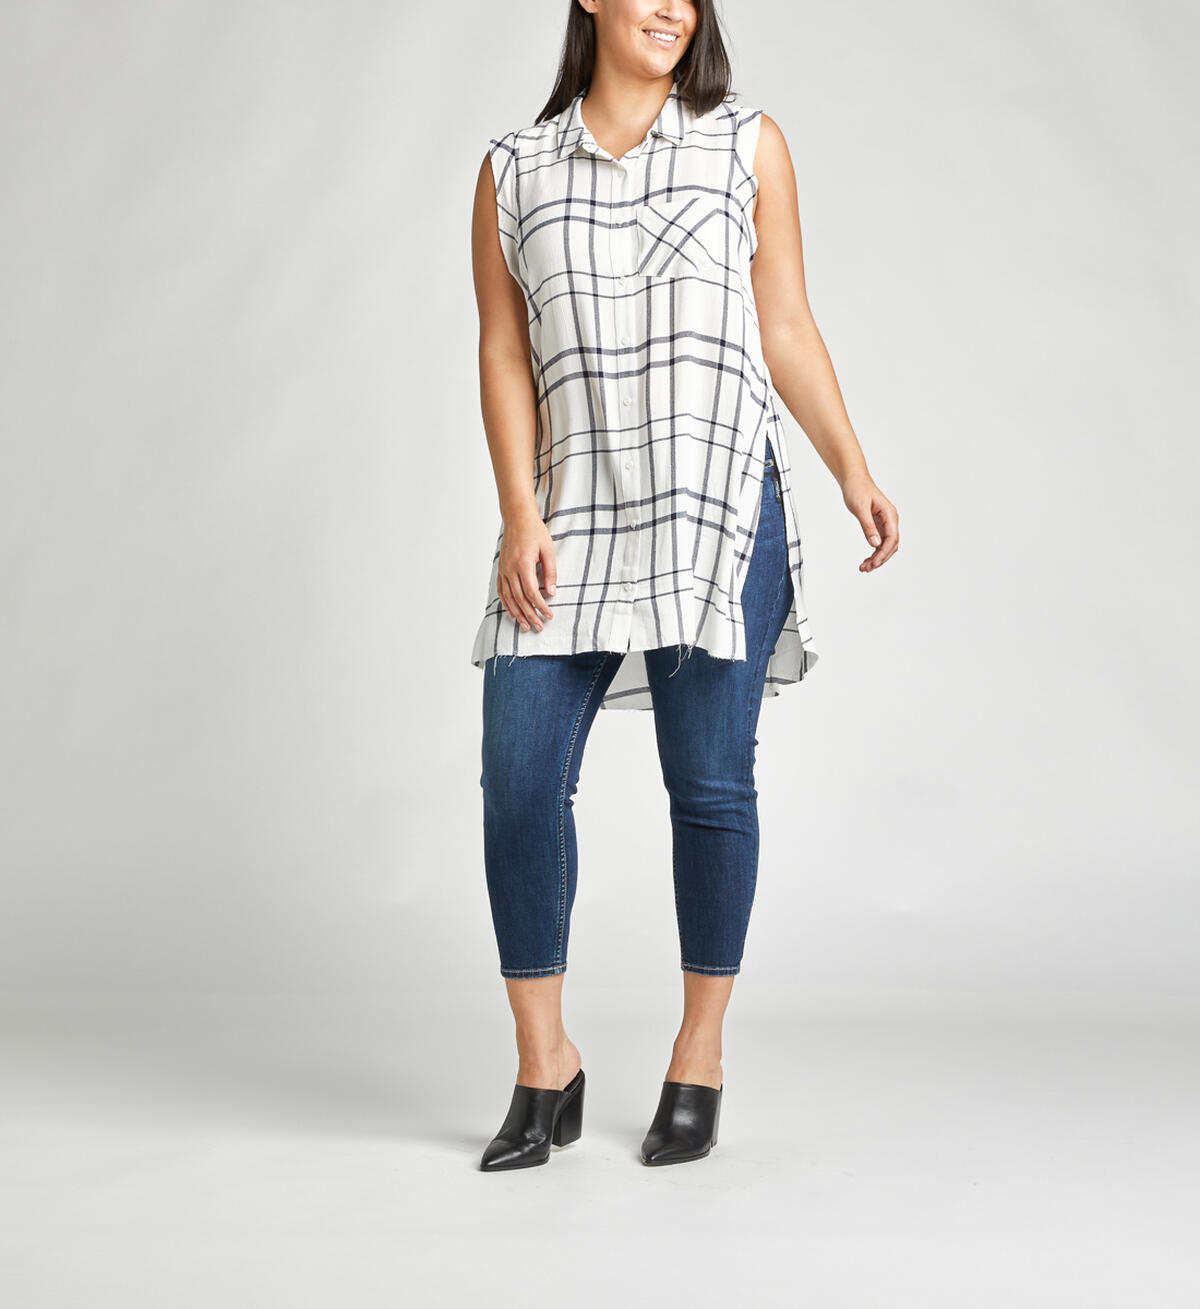 Summer Plaid Frayed Button-Down Tunic, , hi-res image number 3